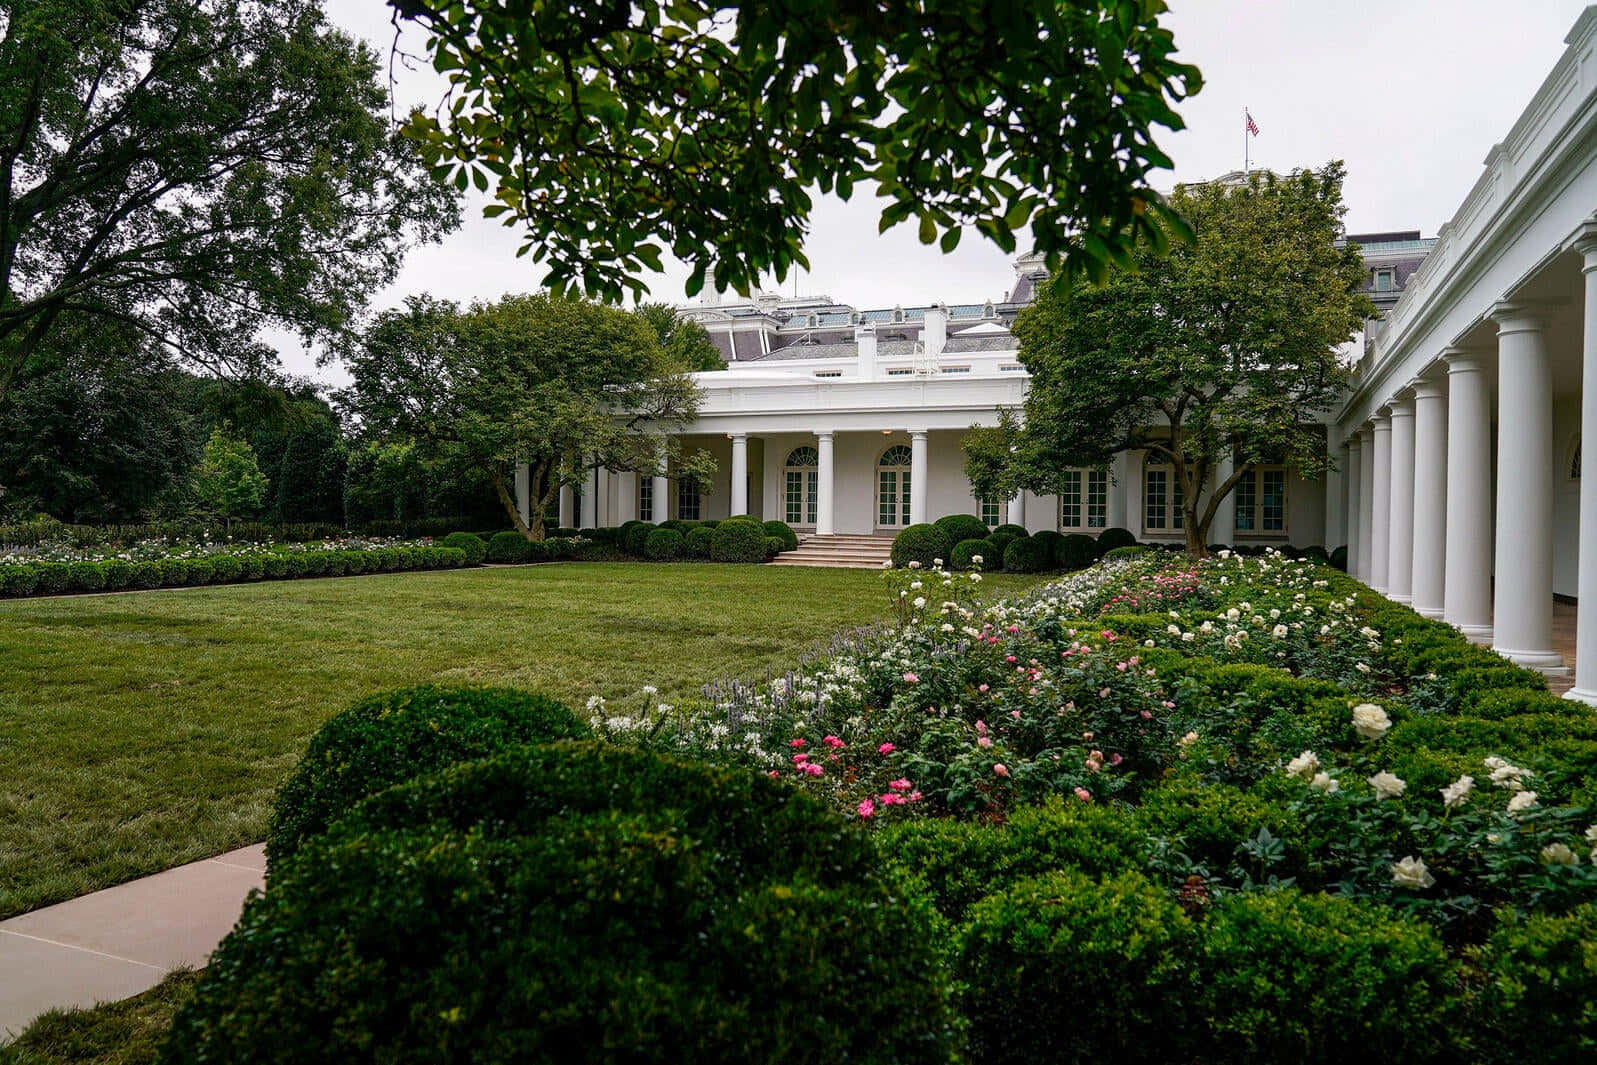 The White House Has A Large Lawn With Trees And Flowers